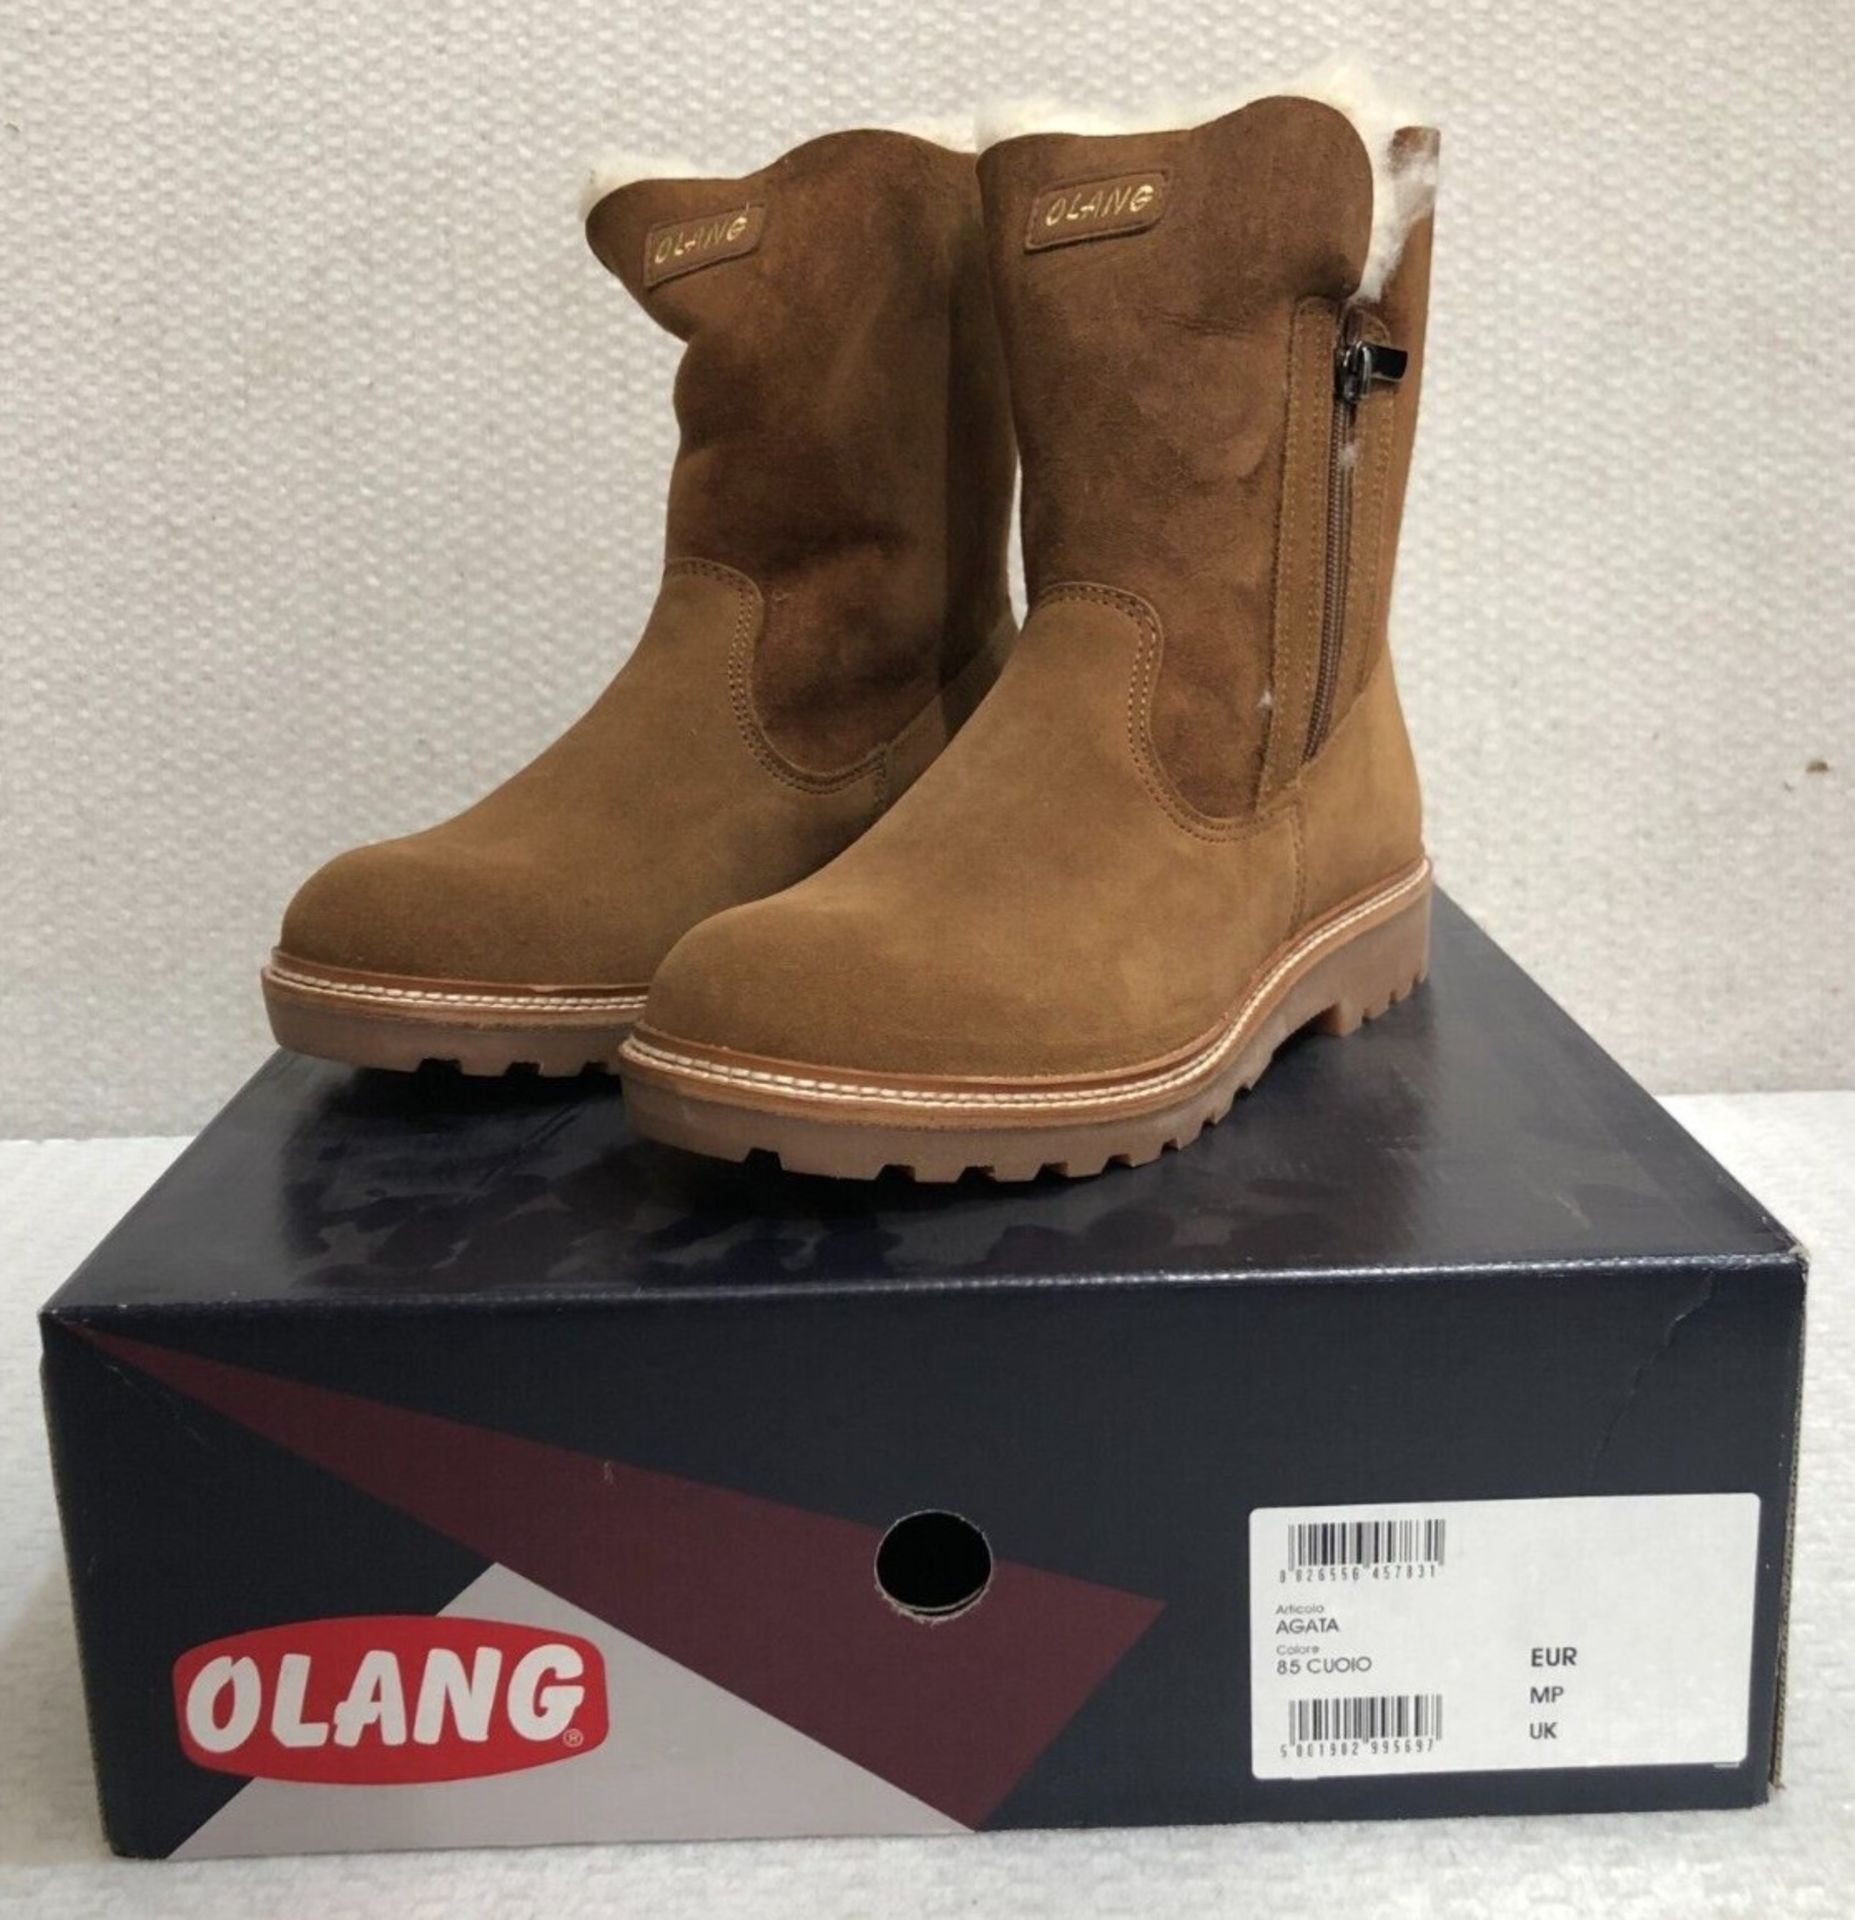 1 x Pair of Designer Olang Women's Winter Boots - Agata 85 Cuoio - Euro Size 36 - New Boxed - Image 2 of 4